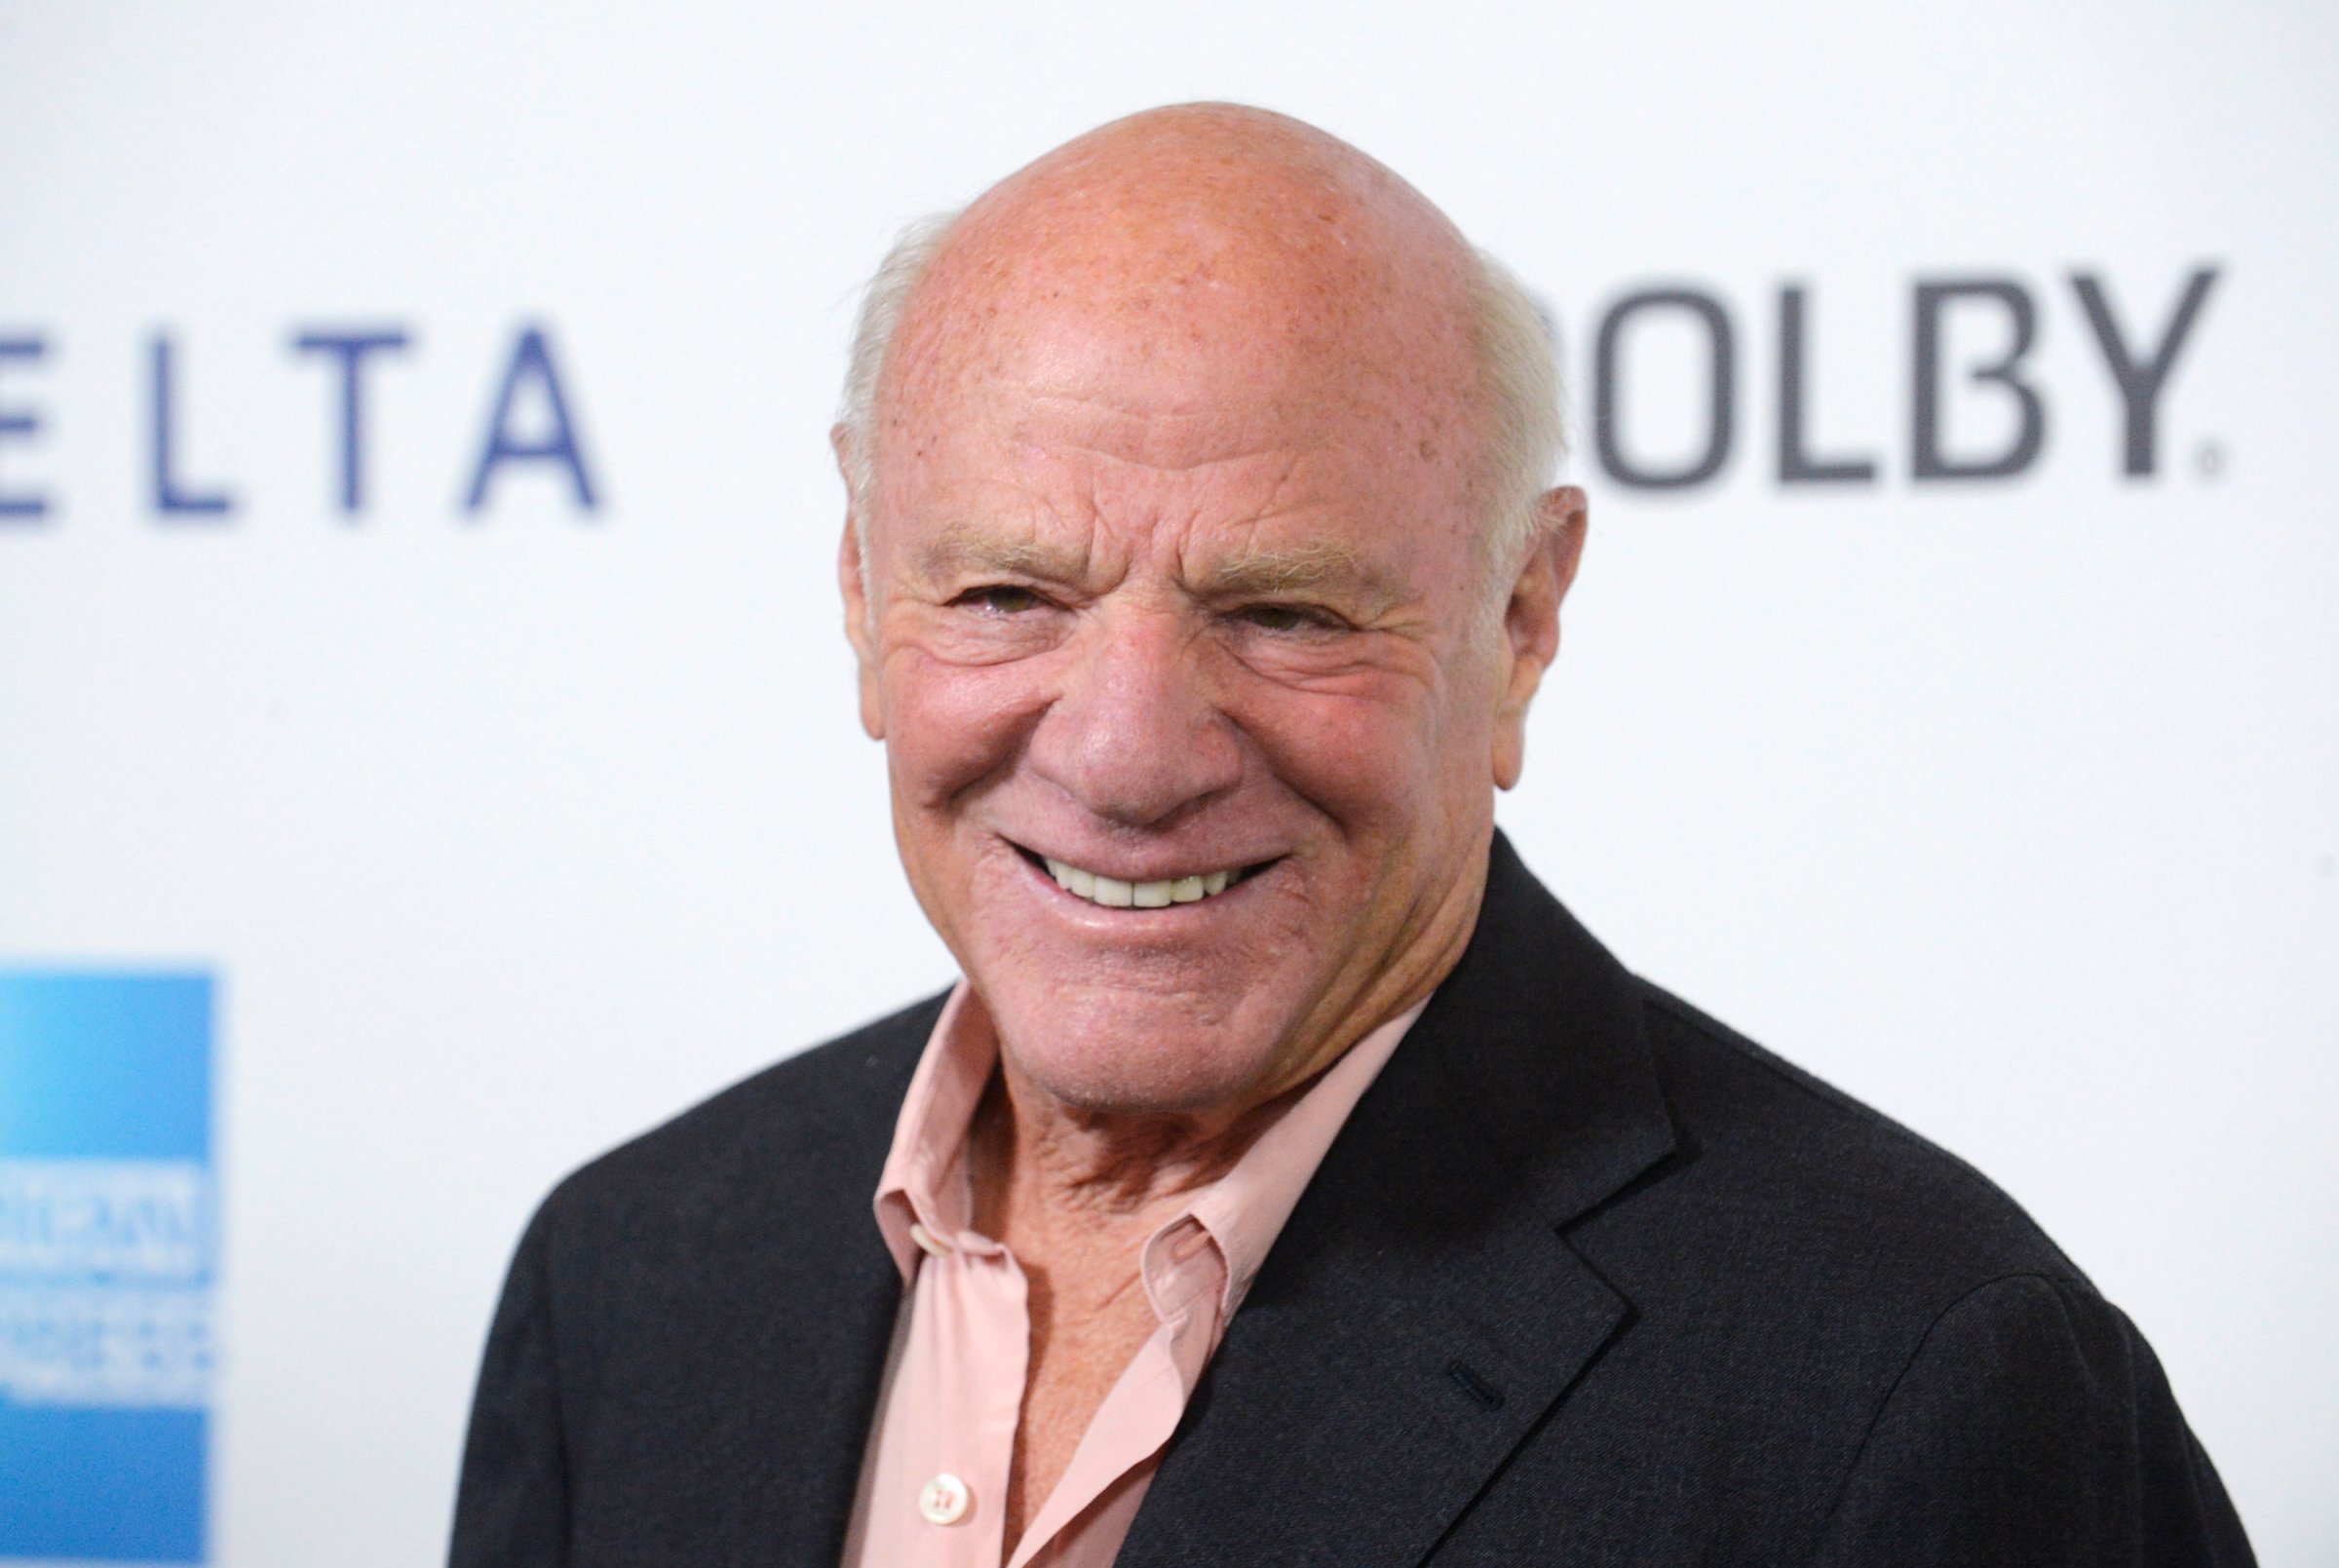 Media tycoon Barry Diller attends the performance of "One Night Only" benefiting the Motion Picture and Television Fund in Los Angeles